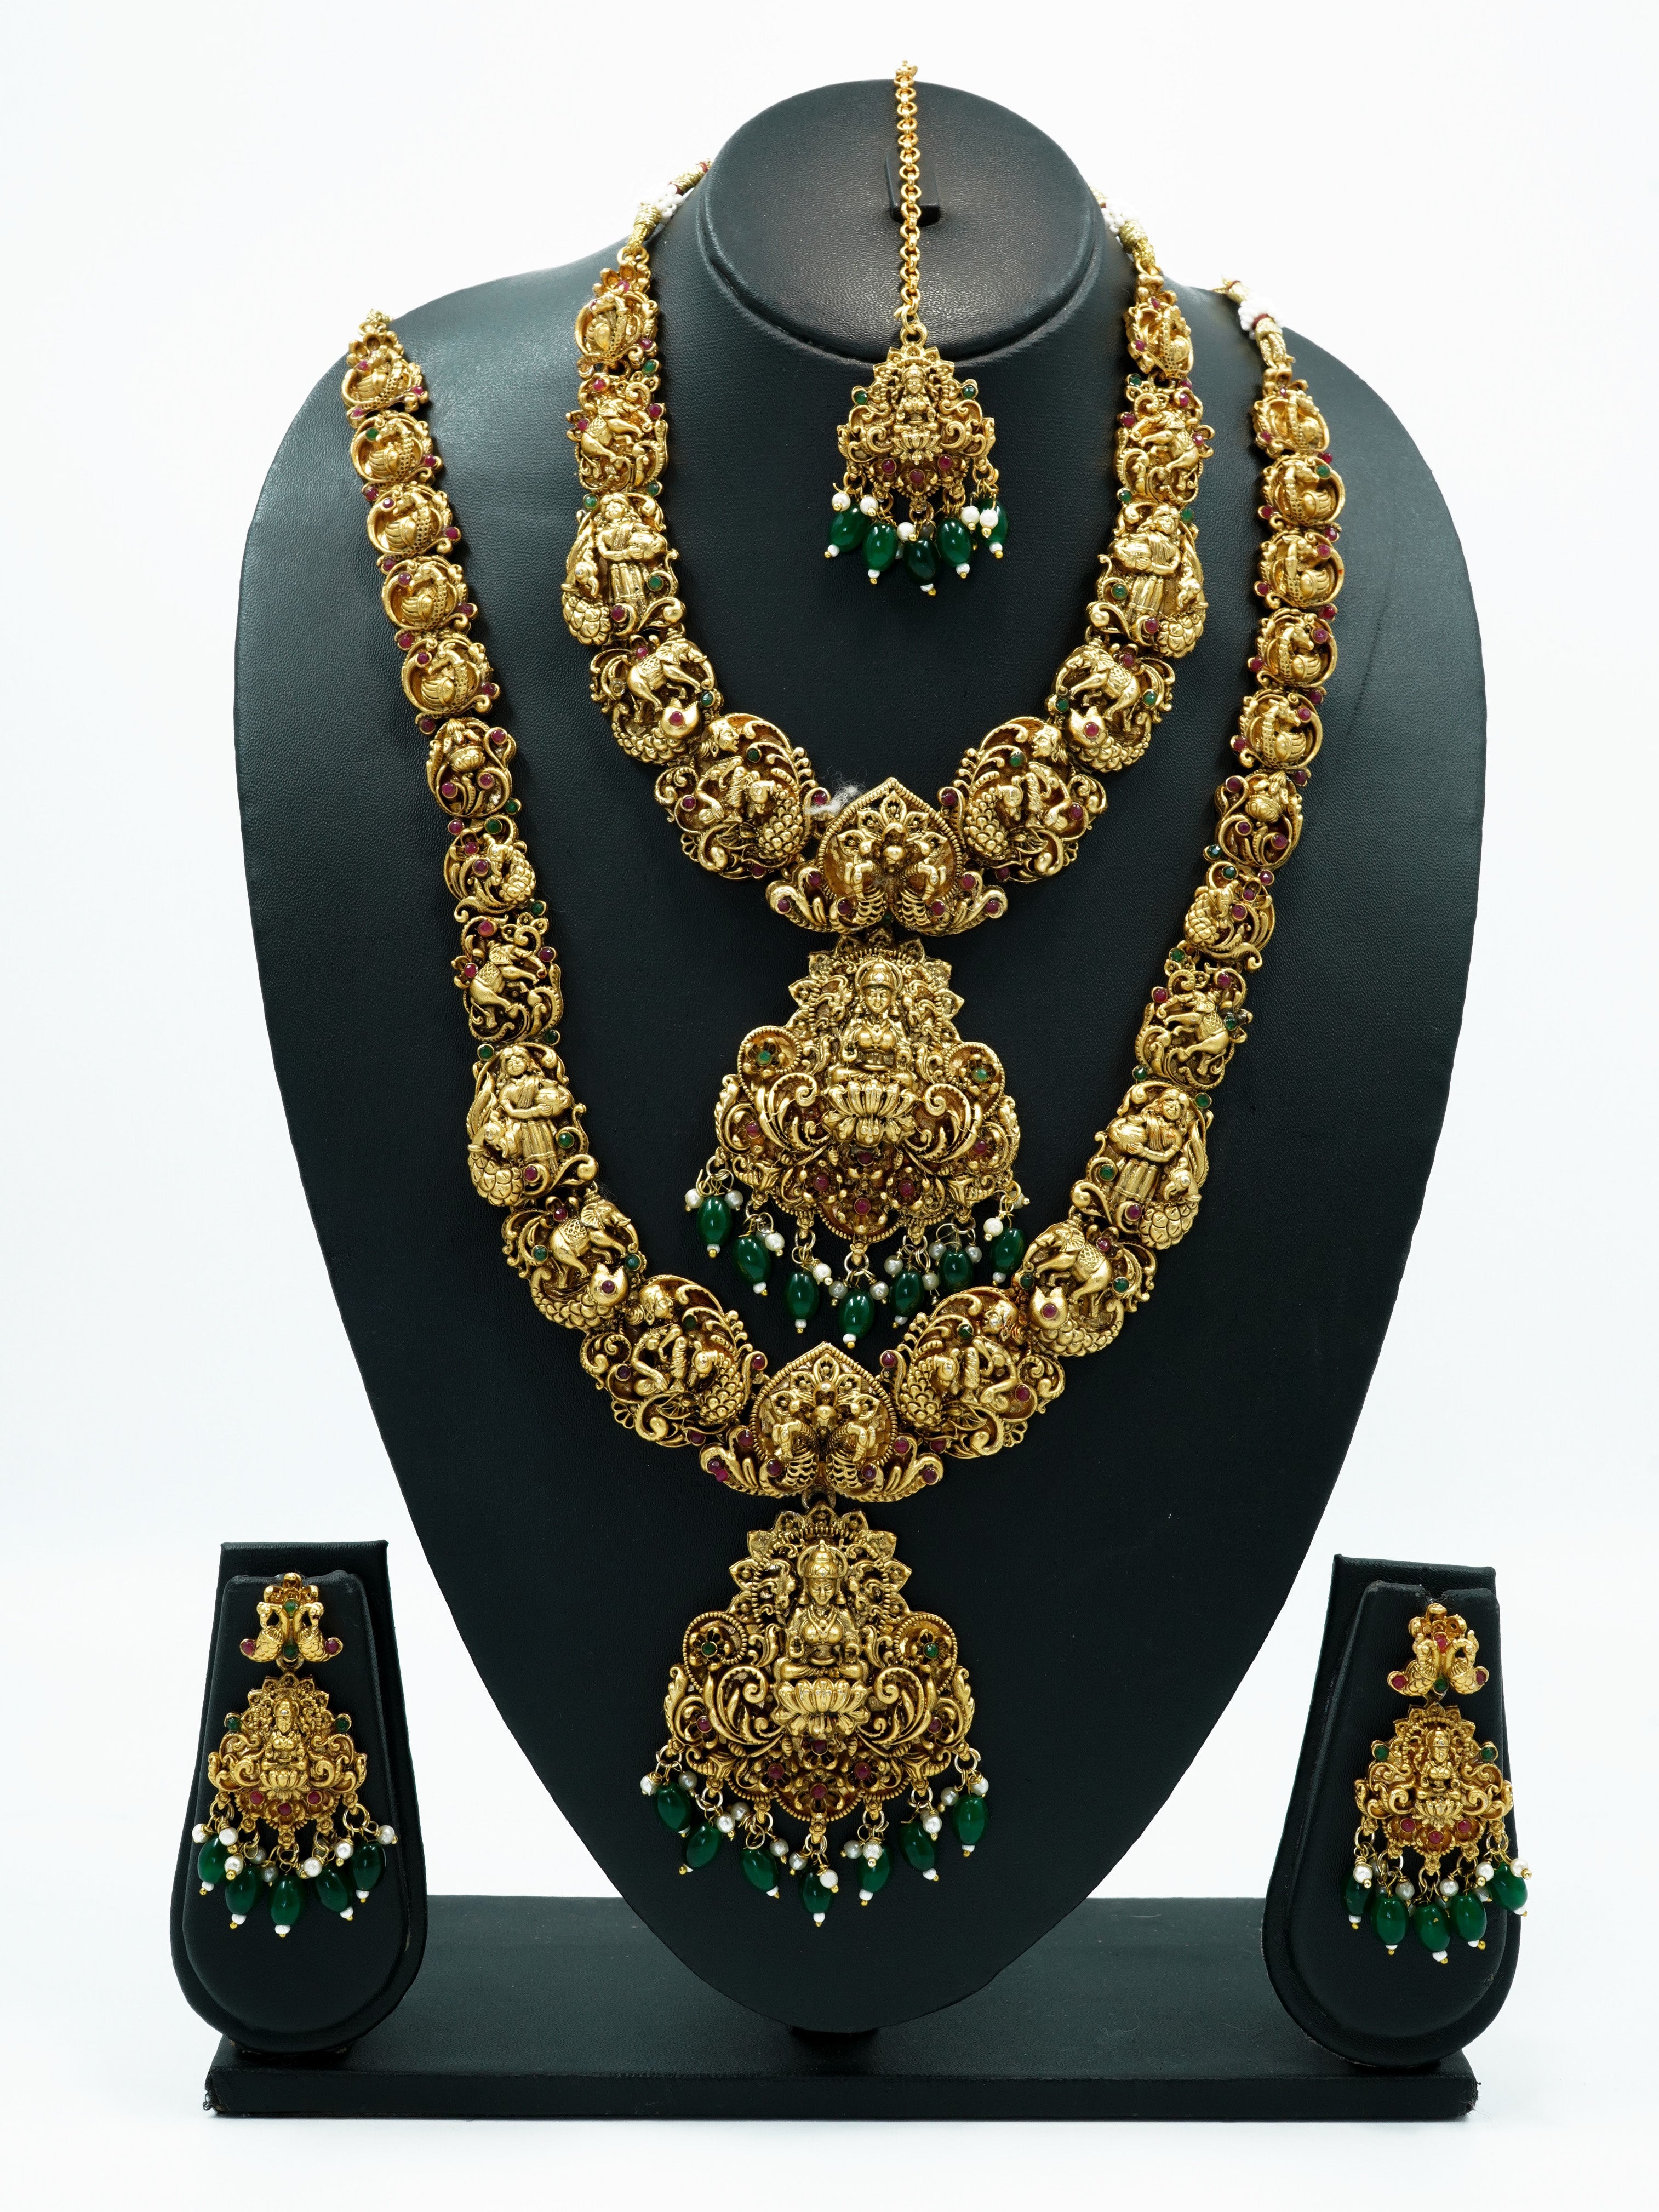 Antique Gold Finish Necklace Combo Set with green beads Multicolor stones 11030N